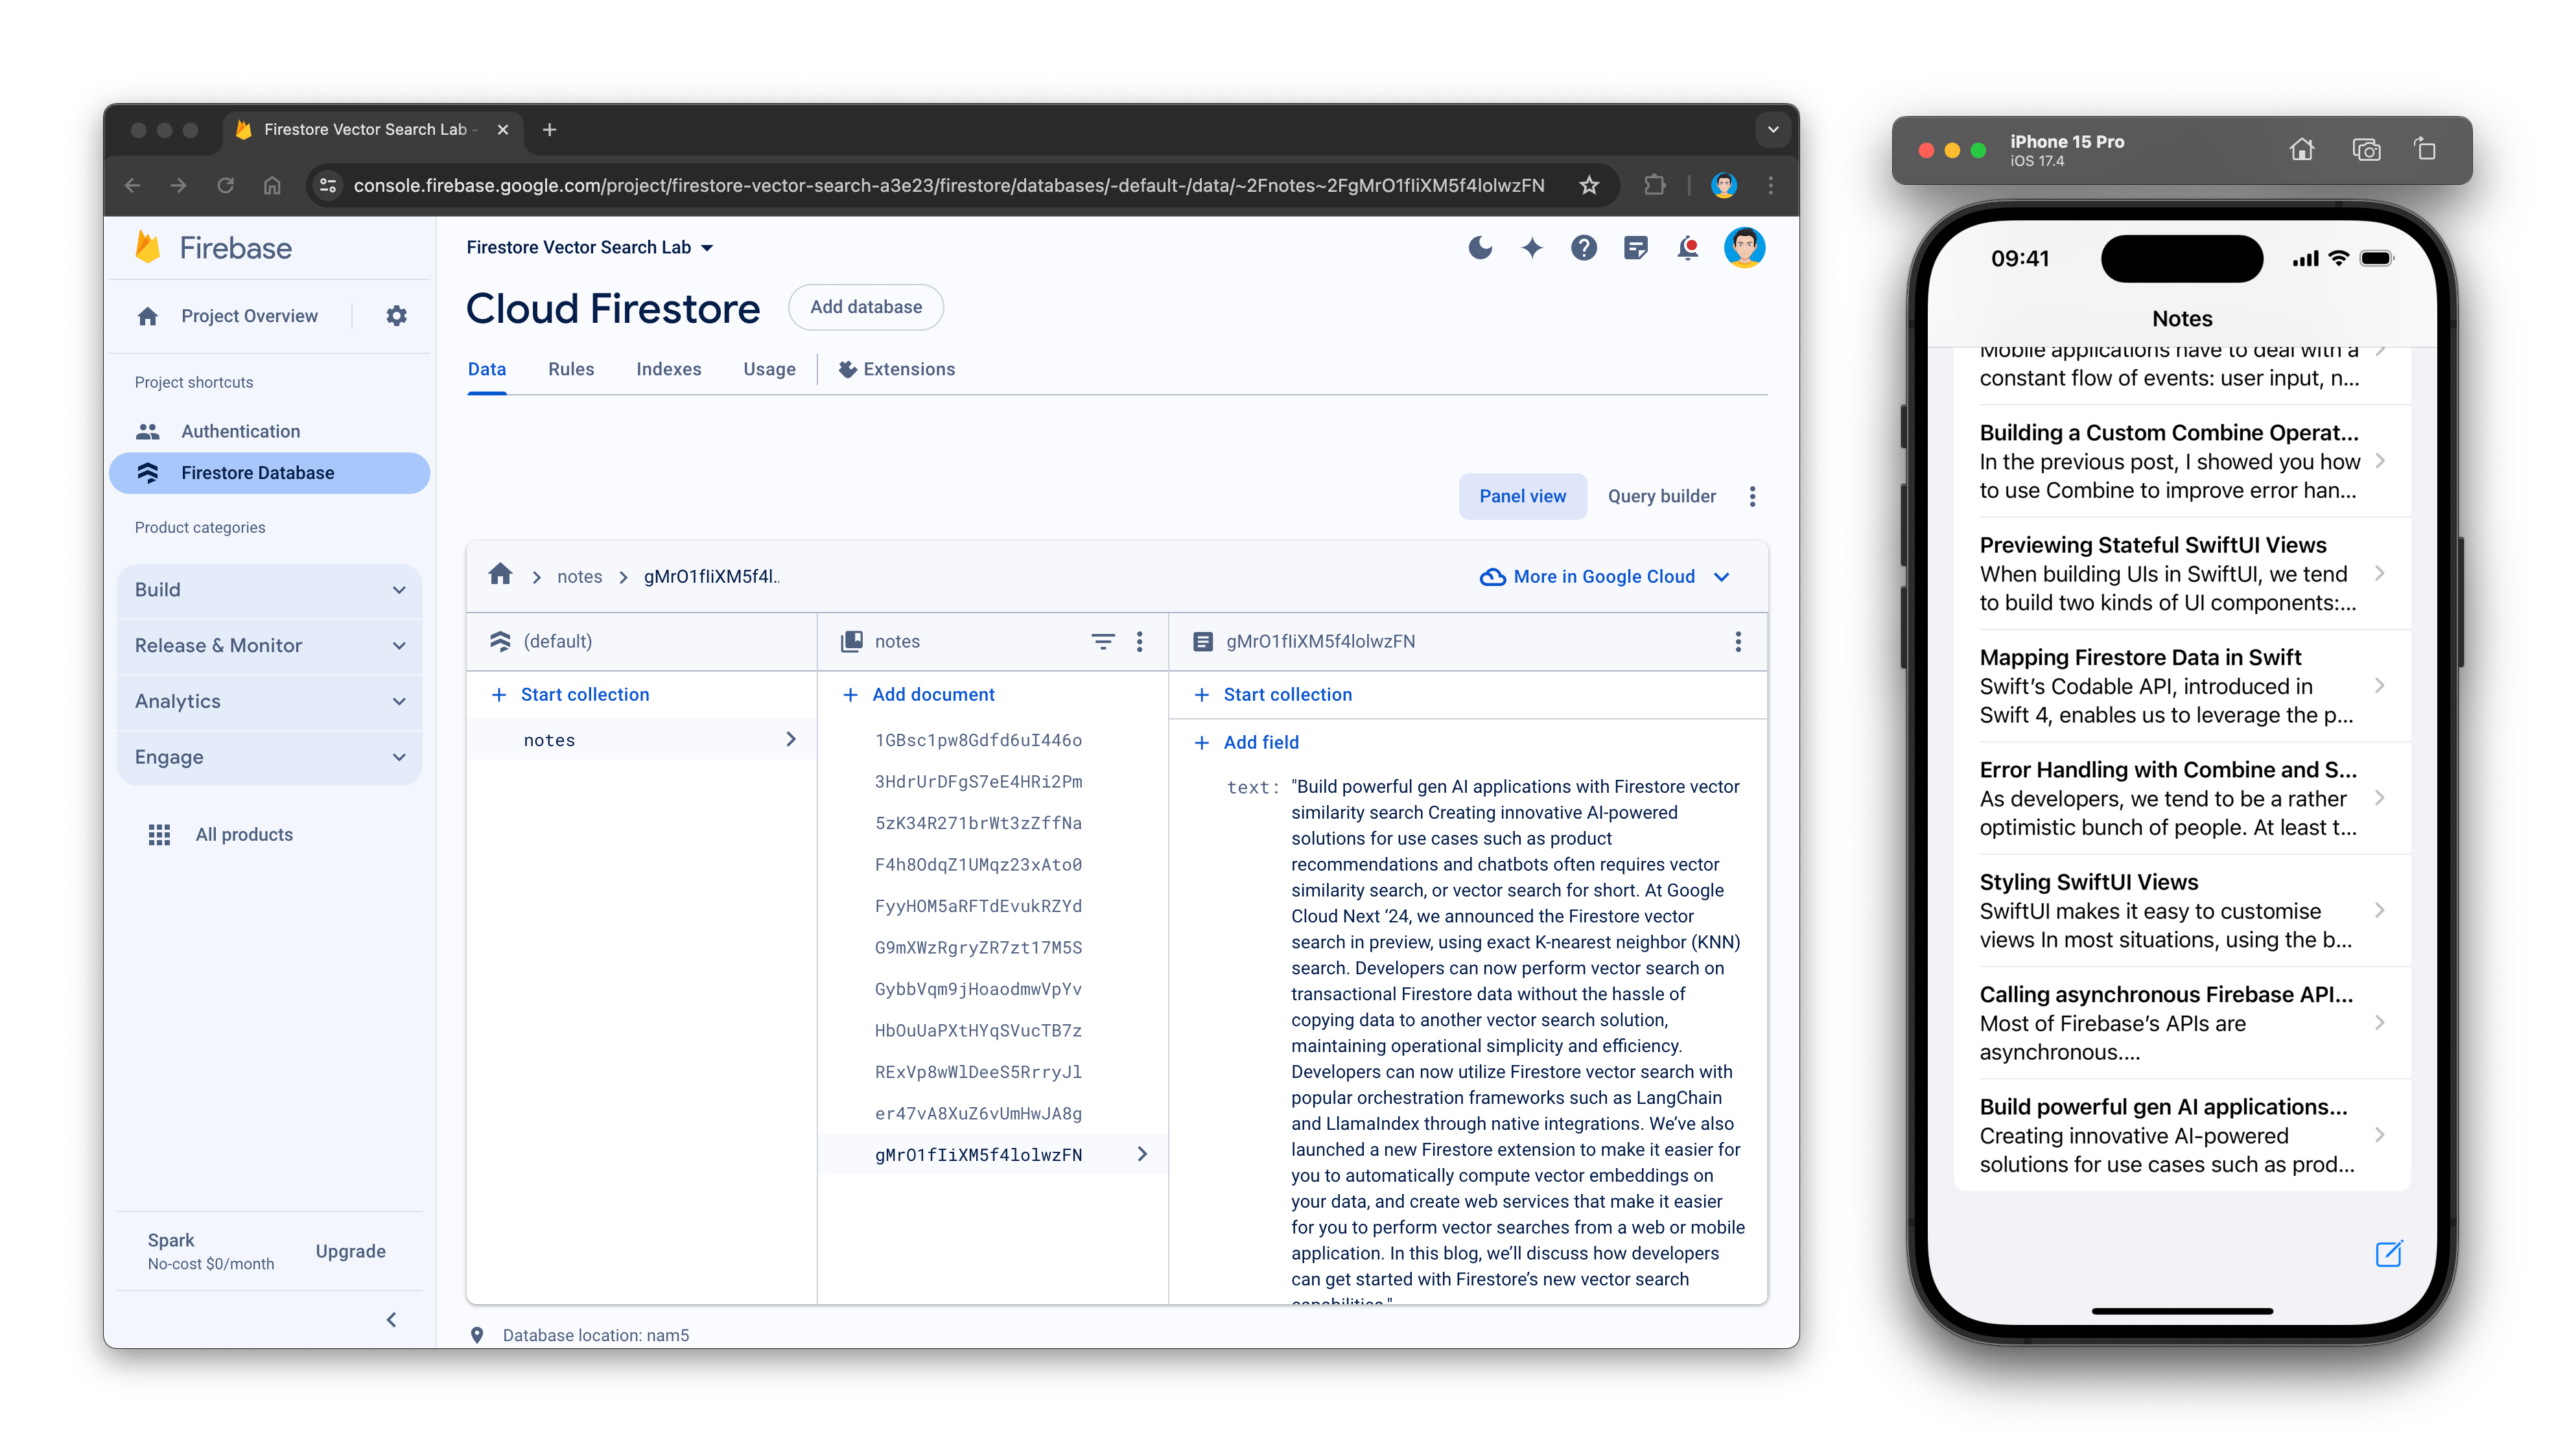 Cloud Firestore console showing some documents, alongside the iOS Simulator which shows the same documents